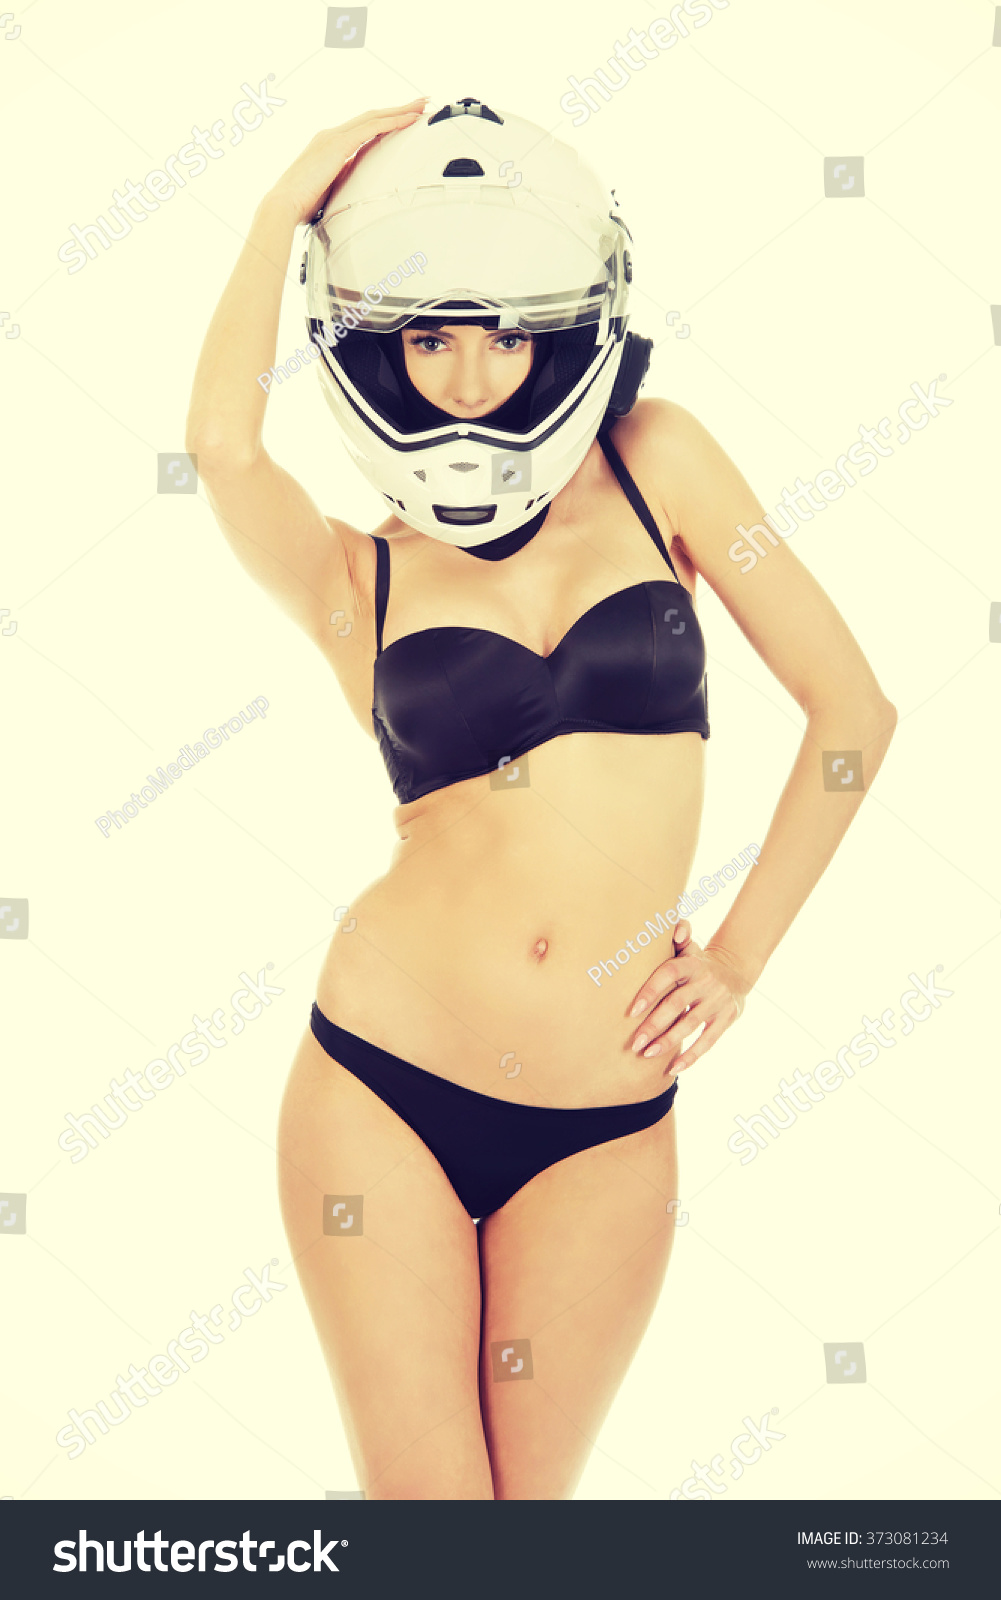 Sexy Woman With Motorcycle Helmet Stock Photo Shutterstock